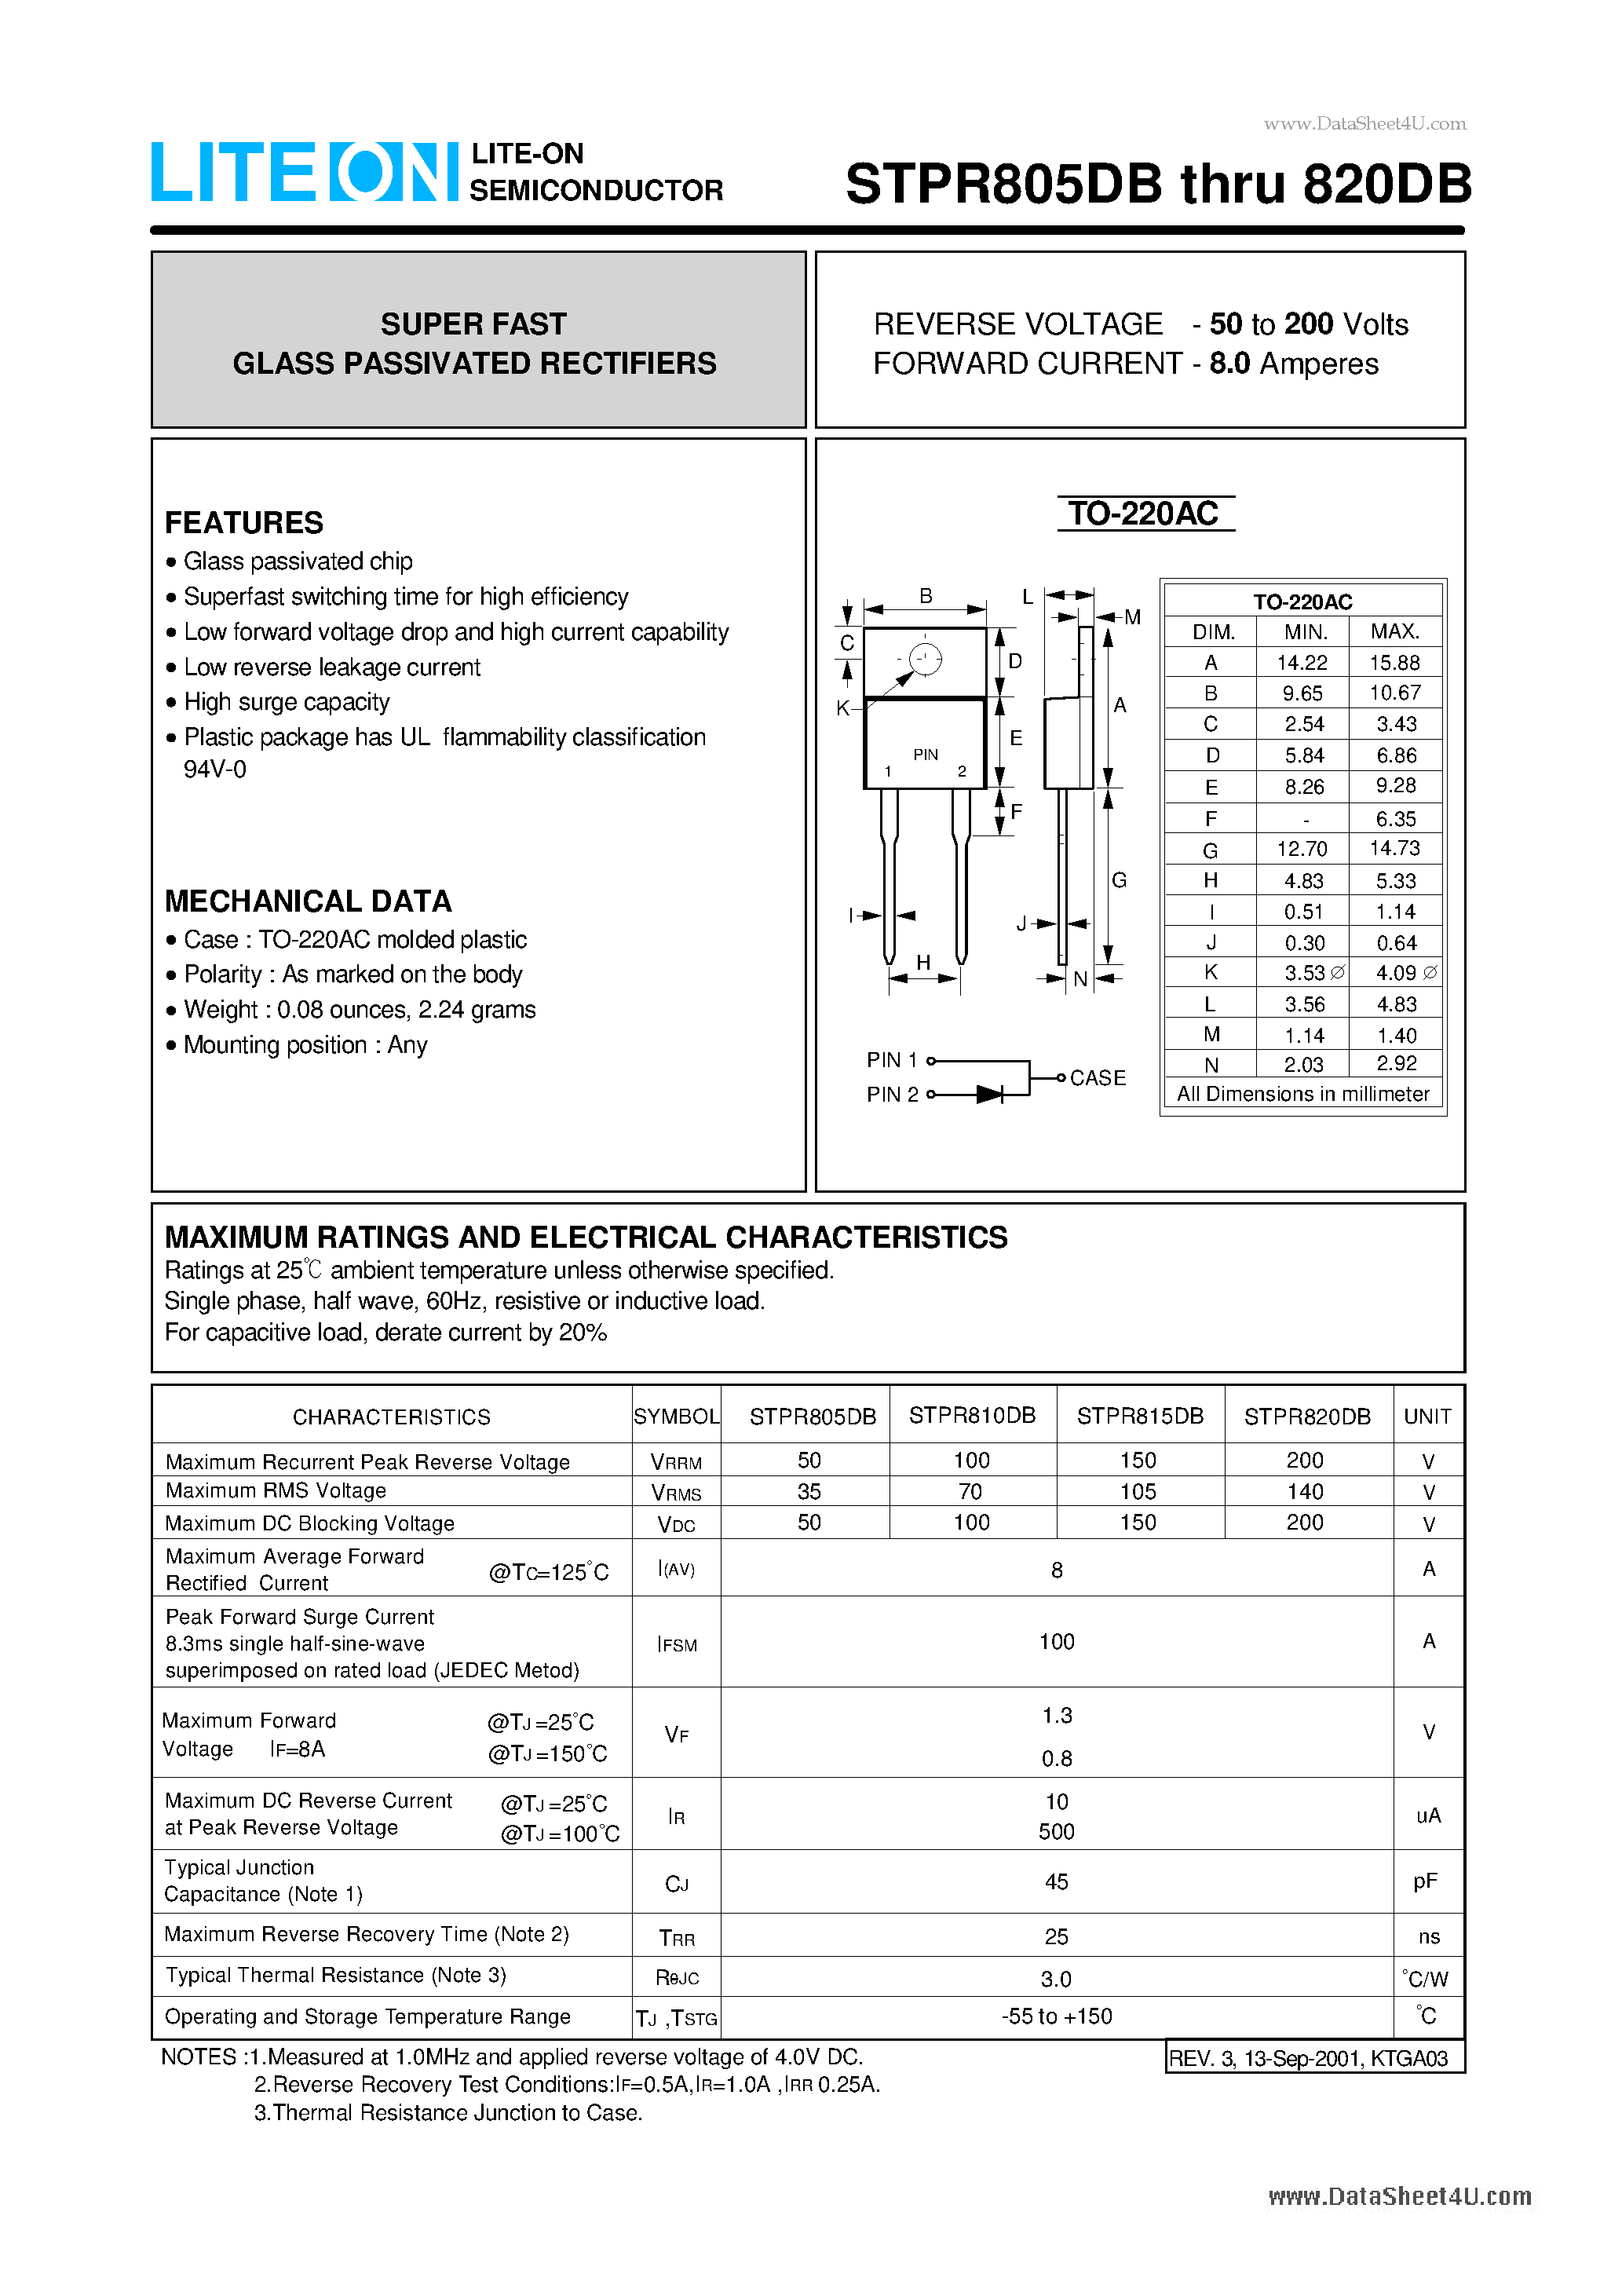 Datasheet STPR805DB - SUPER FAST GLASS PASSIVATED RECTIFIERS page 1